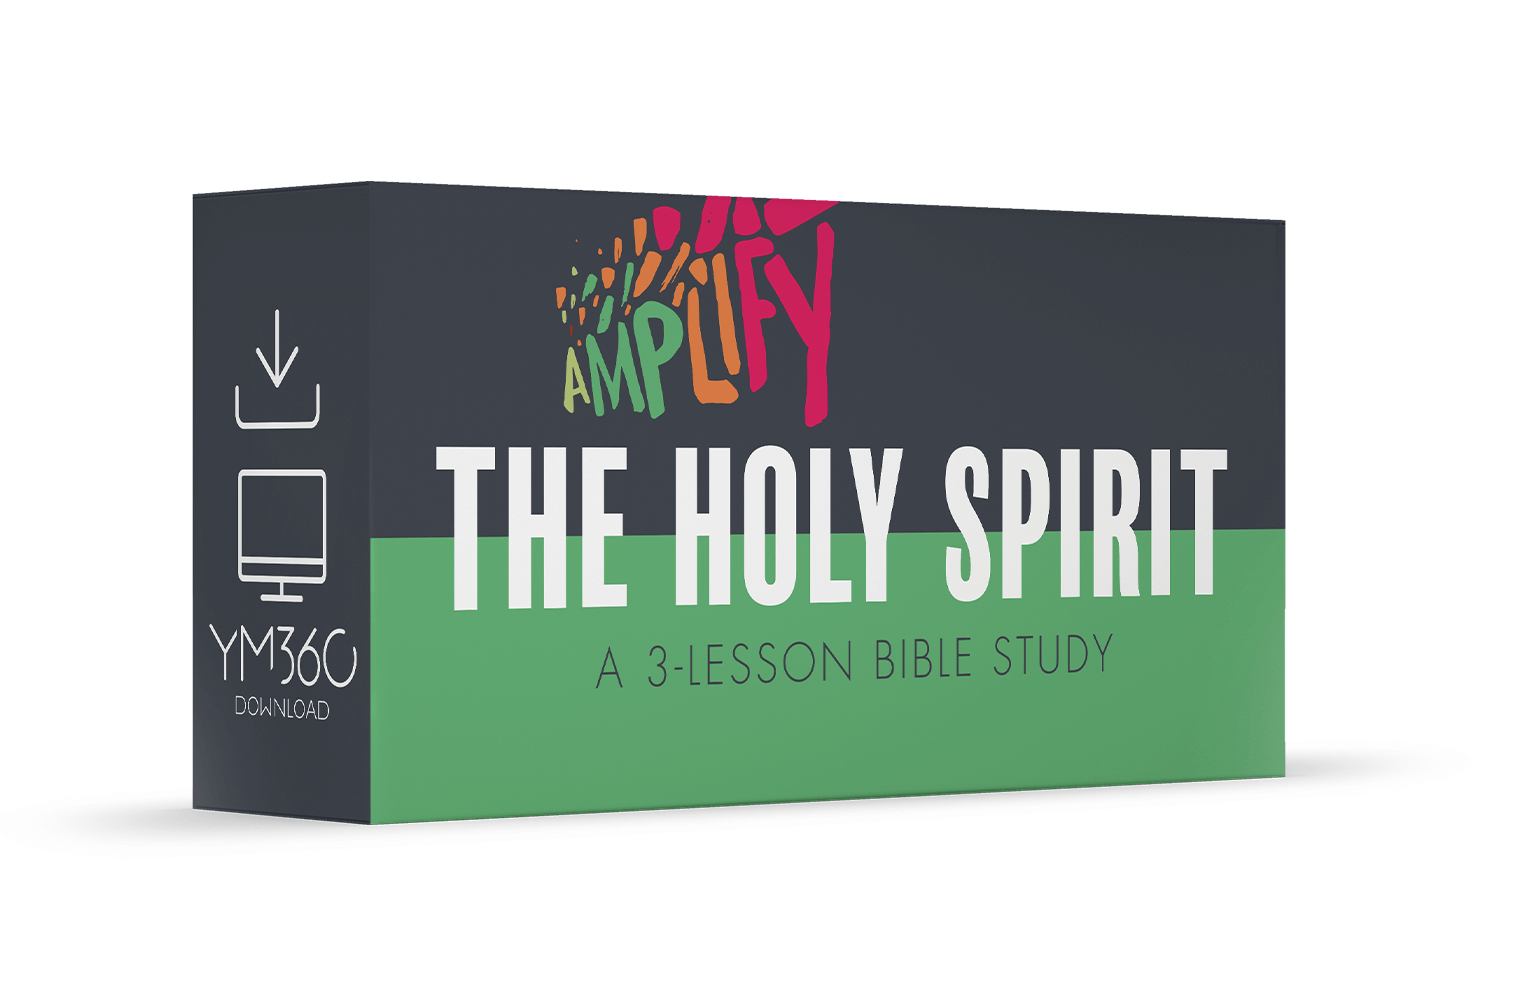 The Holy Spirit: A 3-Lesson Bible Study